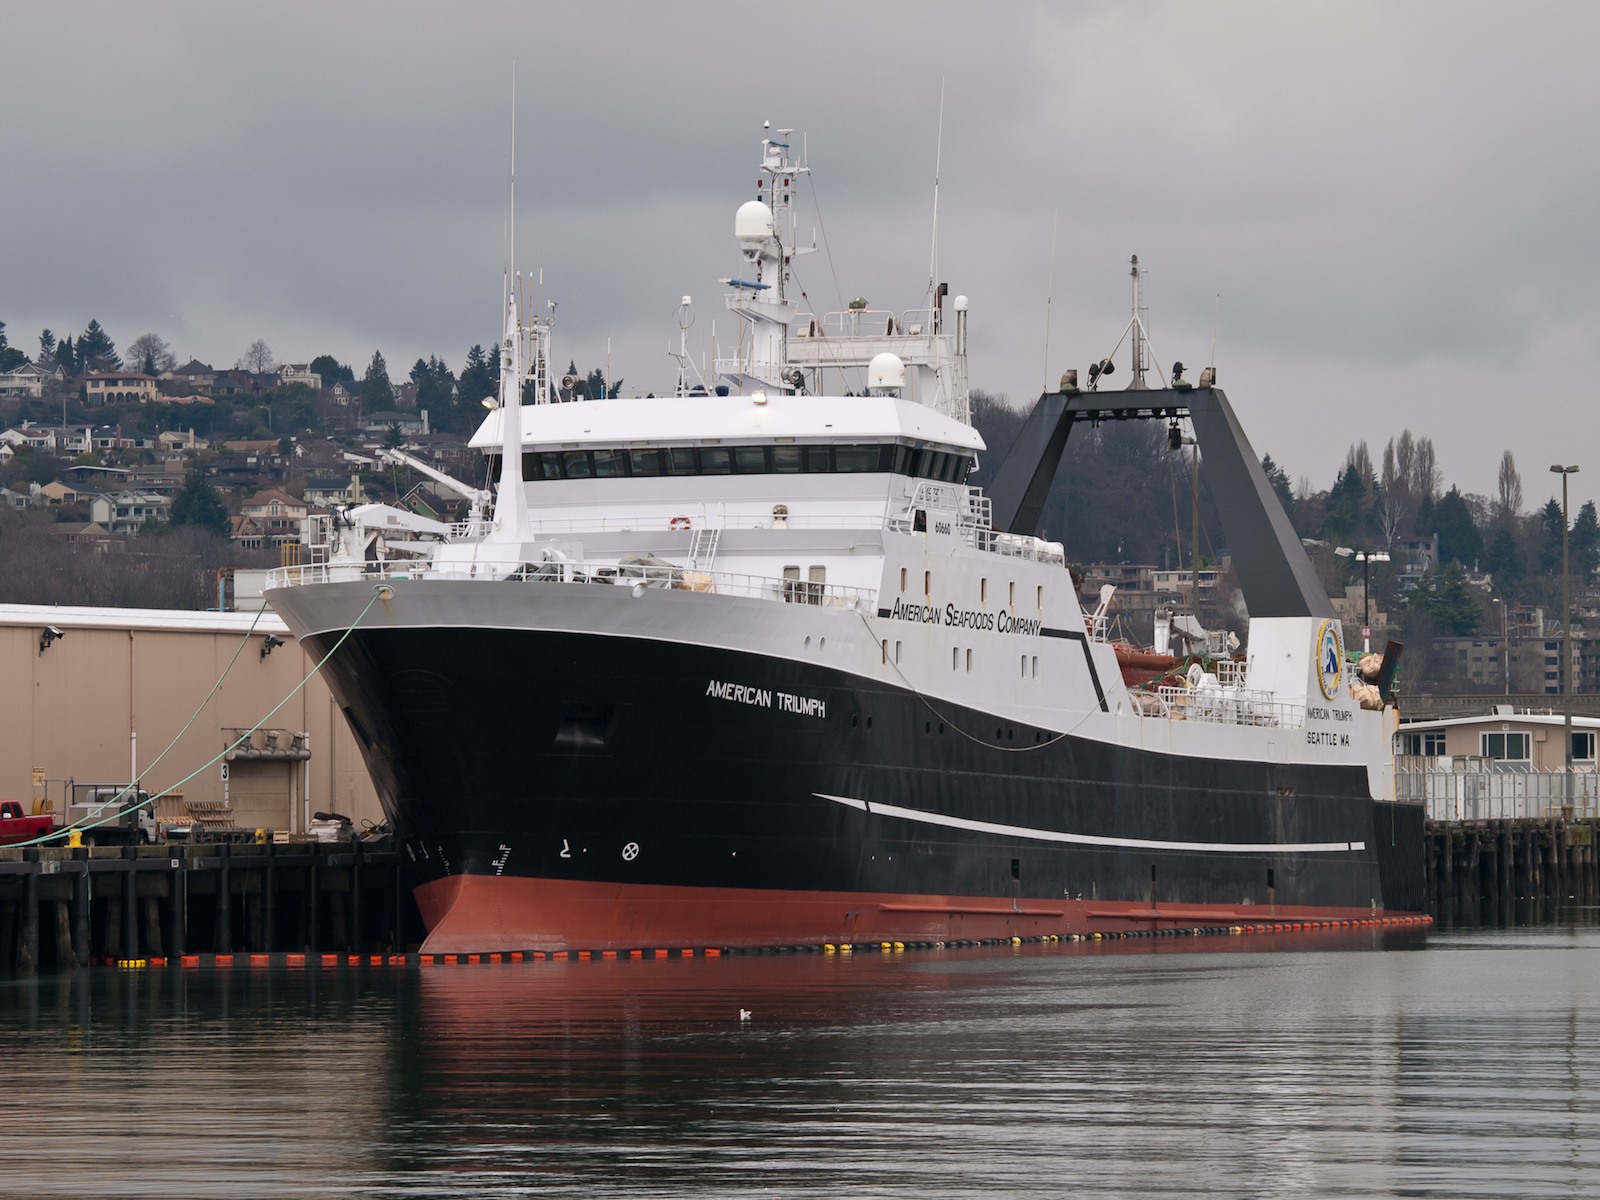 The American Triumph vessel has experience two Covid-19 outbreaks this year so far (August 2020)